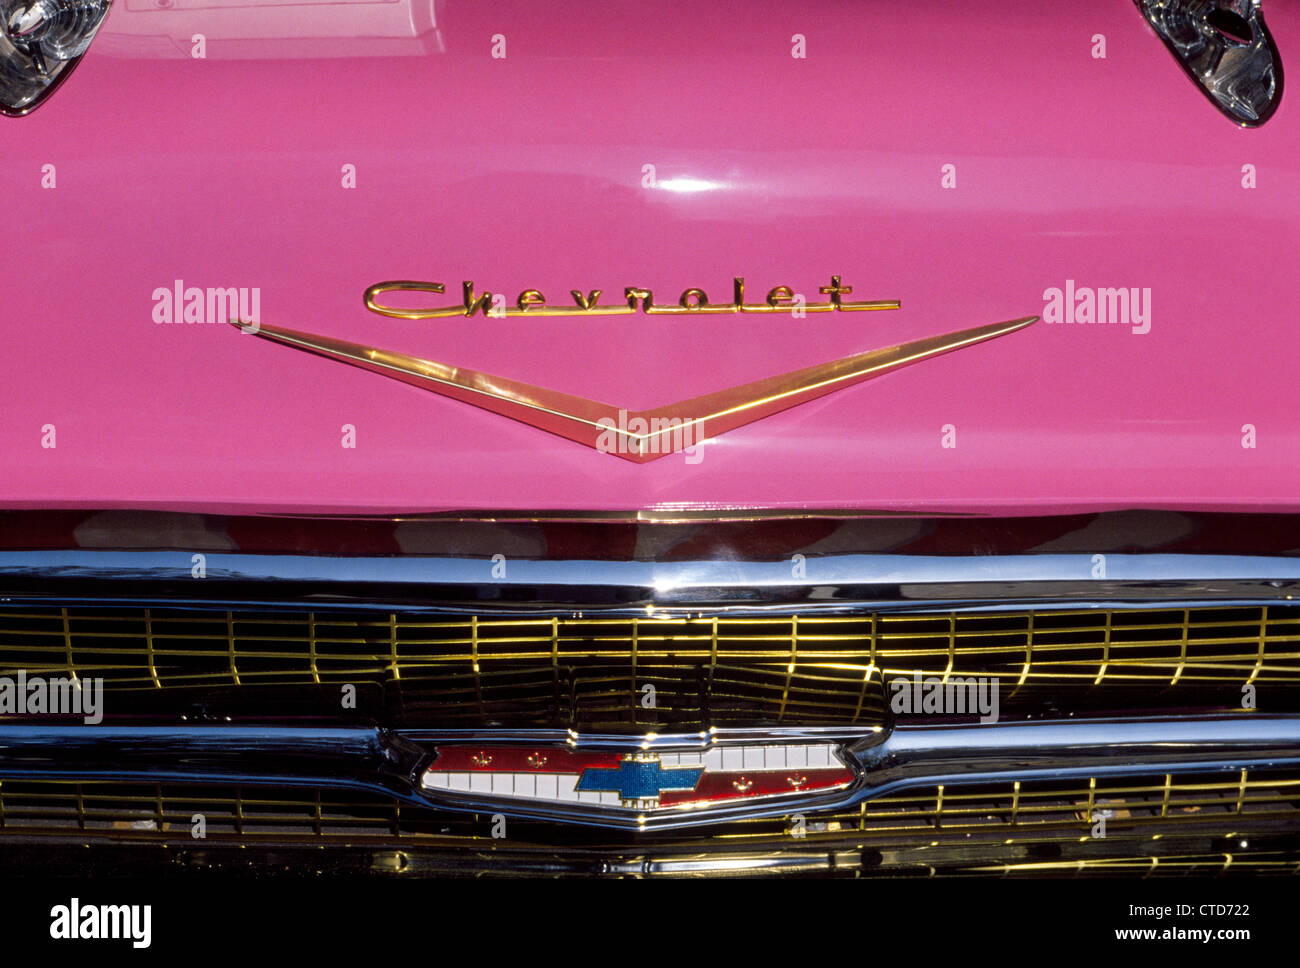 A close-up of a pink automobile hood (bonnet) with the insignias and brand name of a classic American car, the 1957 Chevrolet (Chevy) Bel Air model. Stock Photo